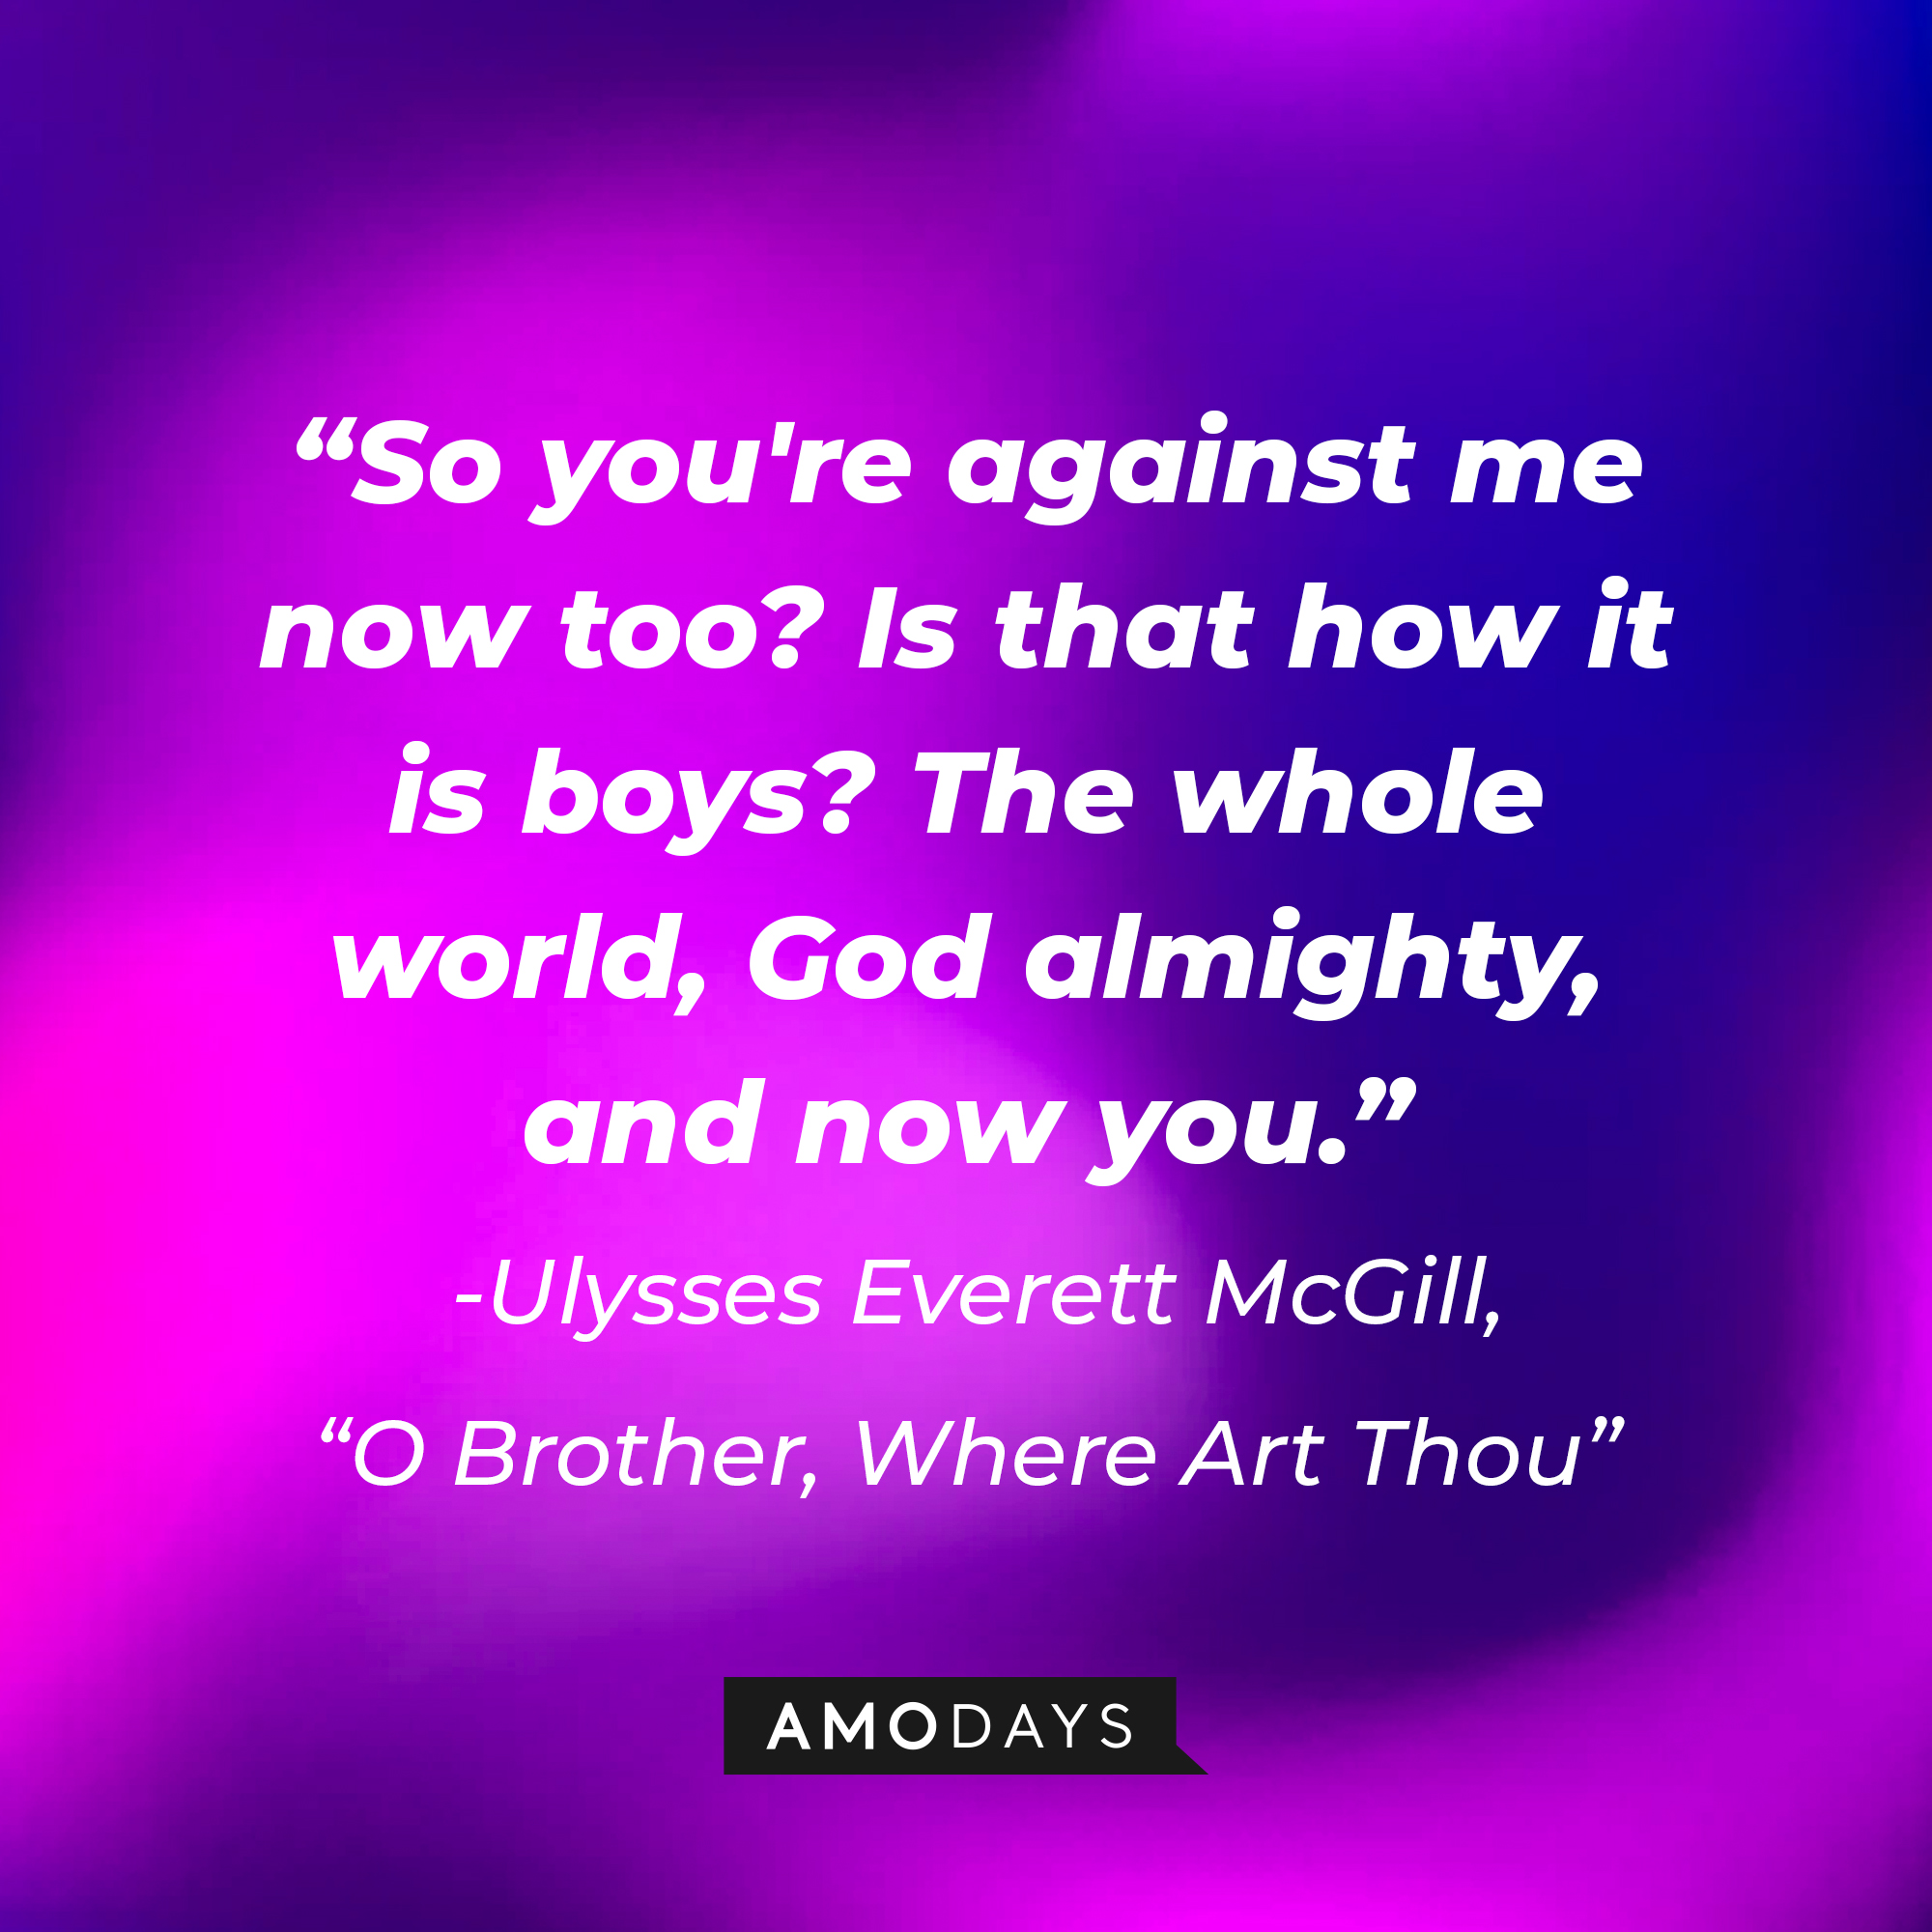 Ulysses Everett McGill's quote in "O Brother, Where Art Thou:" "So you're against me now too? Is that how it is boys? The whole world, God almighty, and now you." | Source: AmoDays